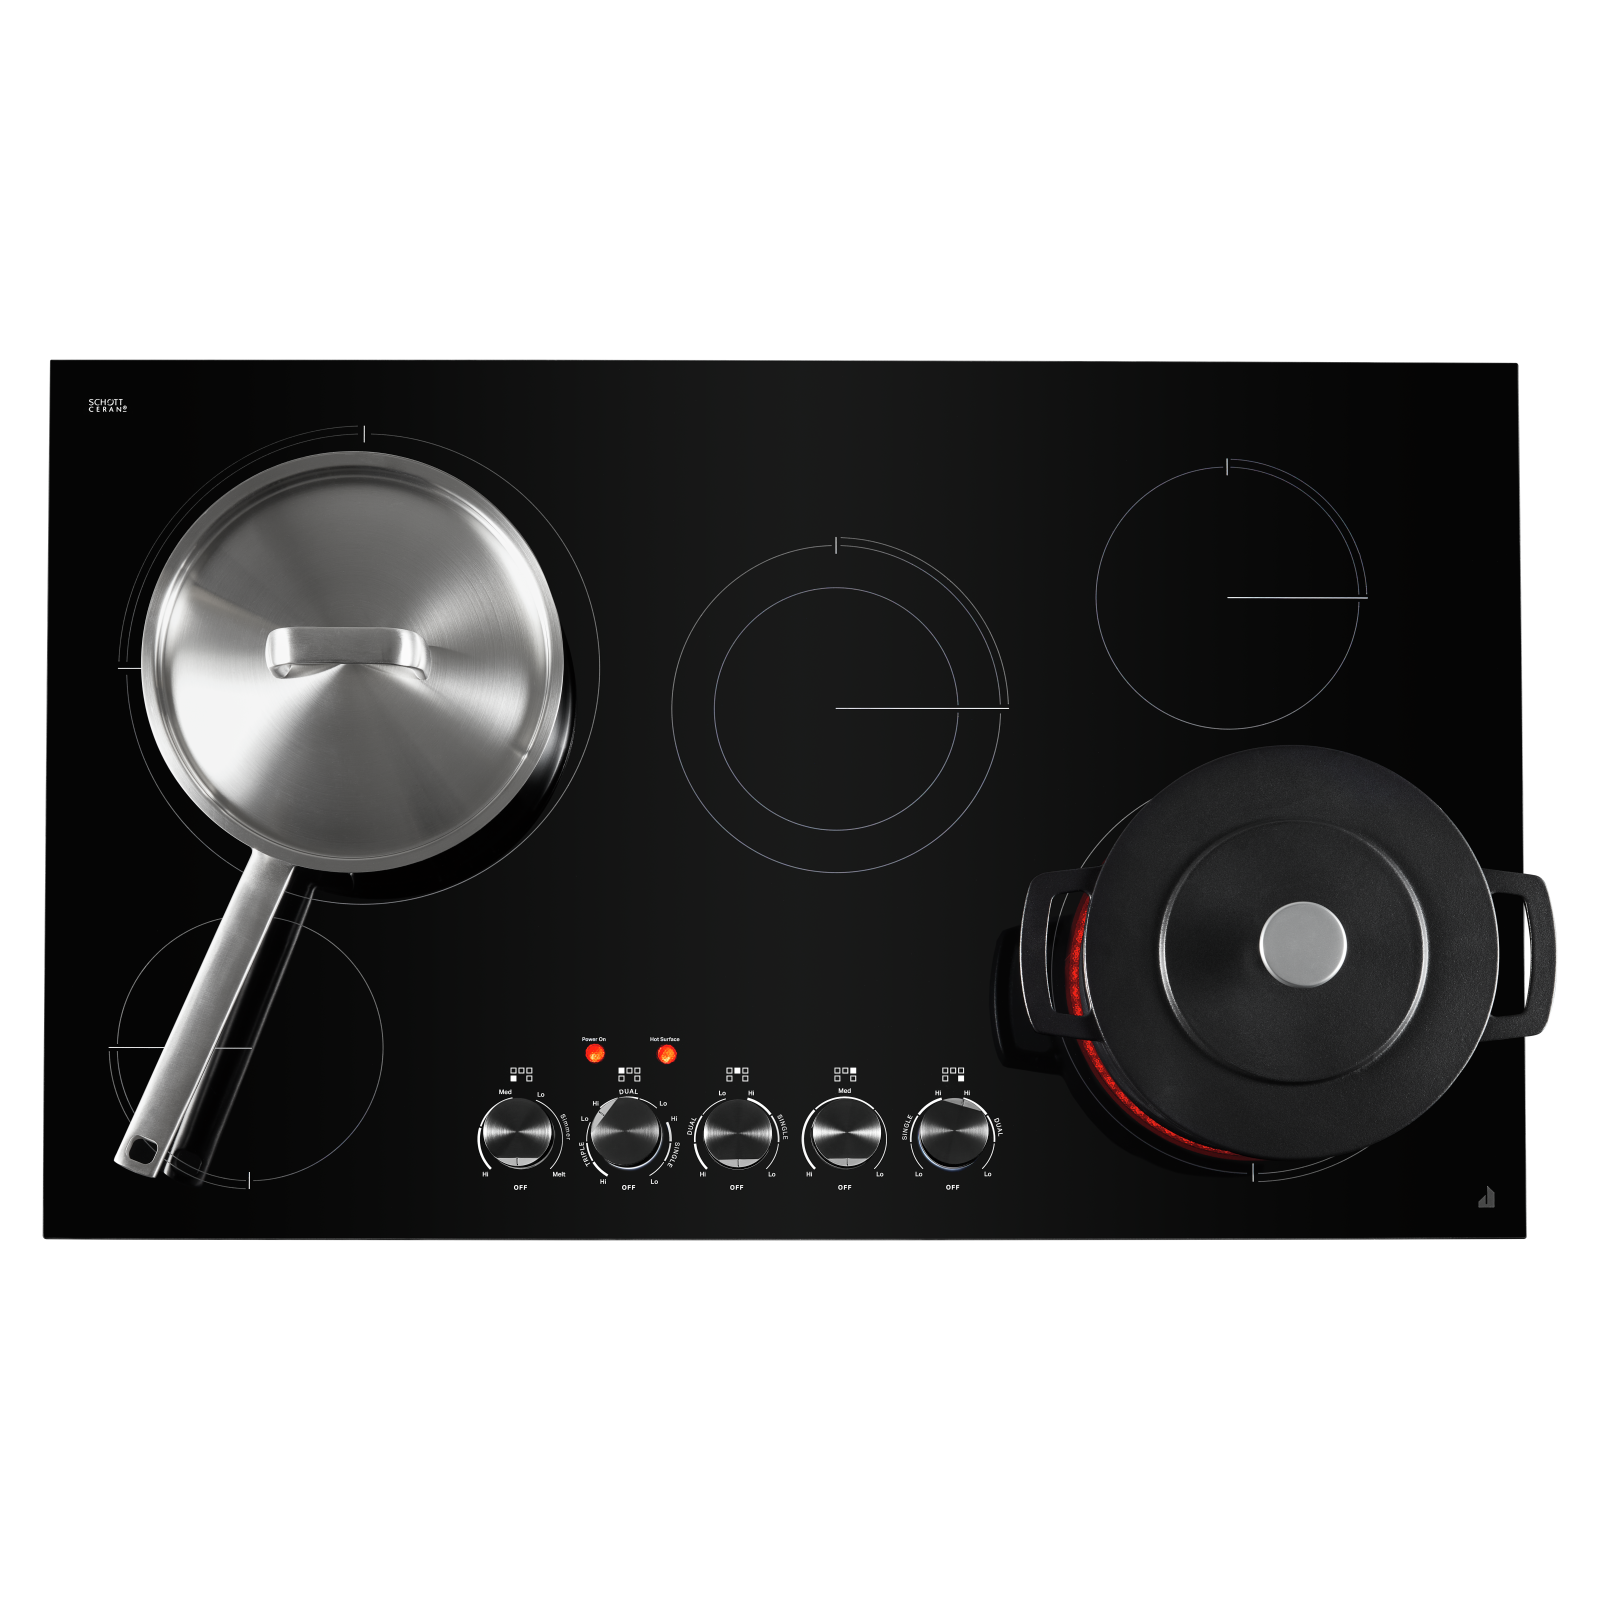 JennAir - 36.3125 inch wide Electric Cooktop in Black - JEC3536HB